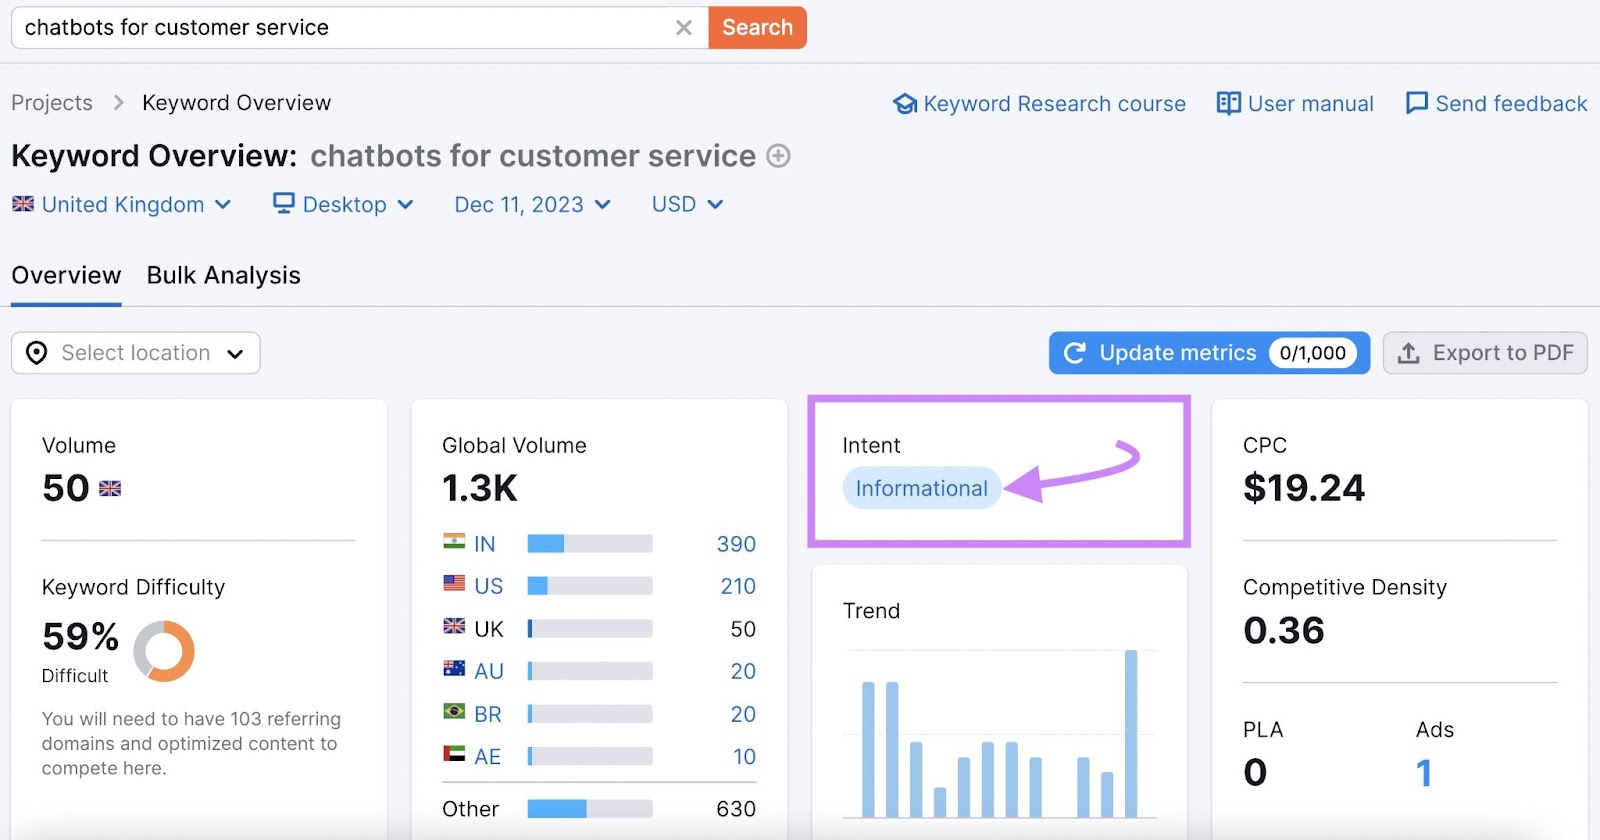 Keyword Overview tool shows "Informational" search intent for “chatbots for customer service" keyword